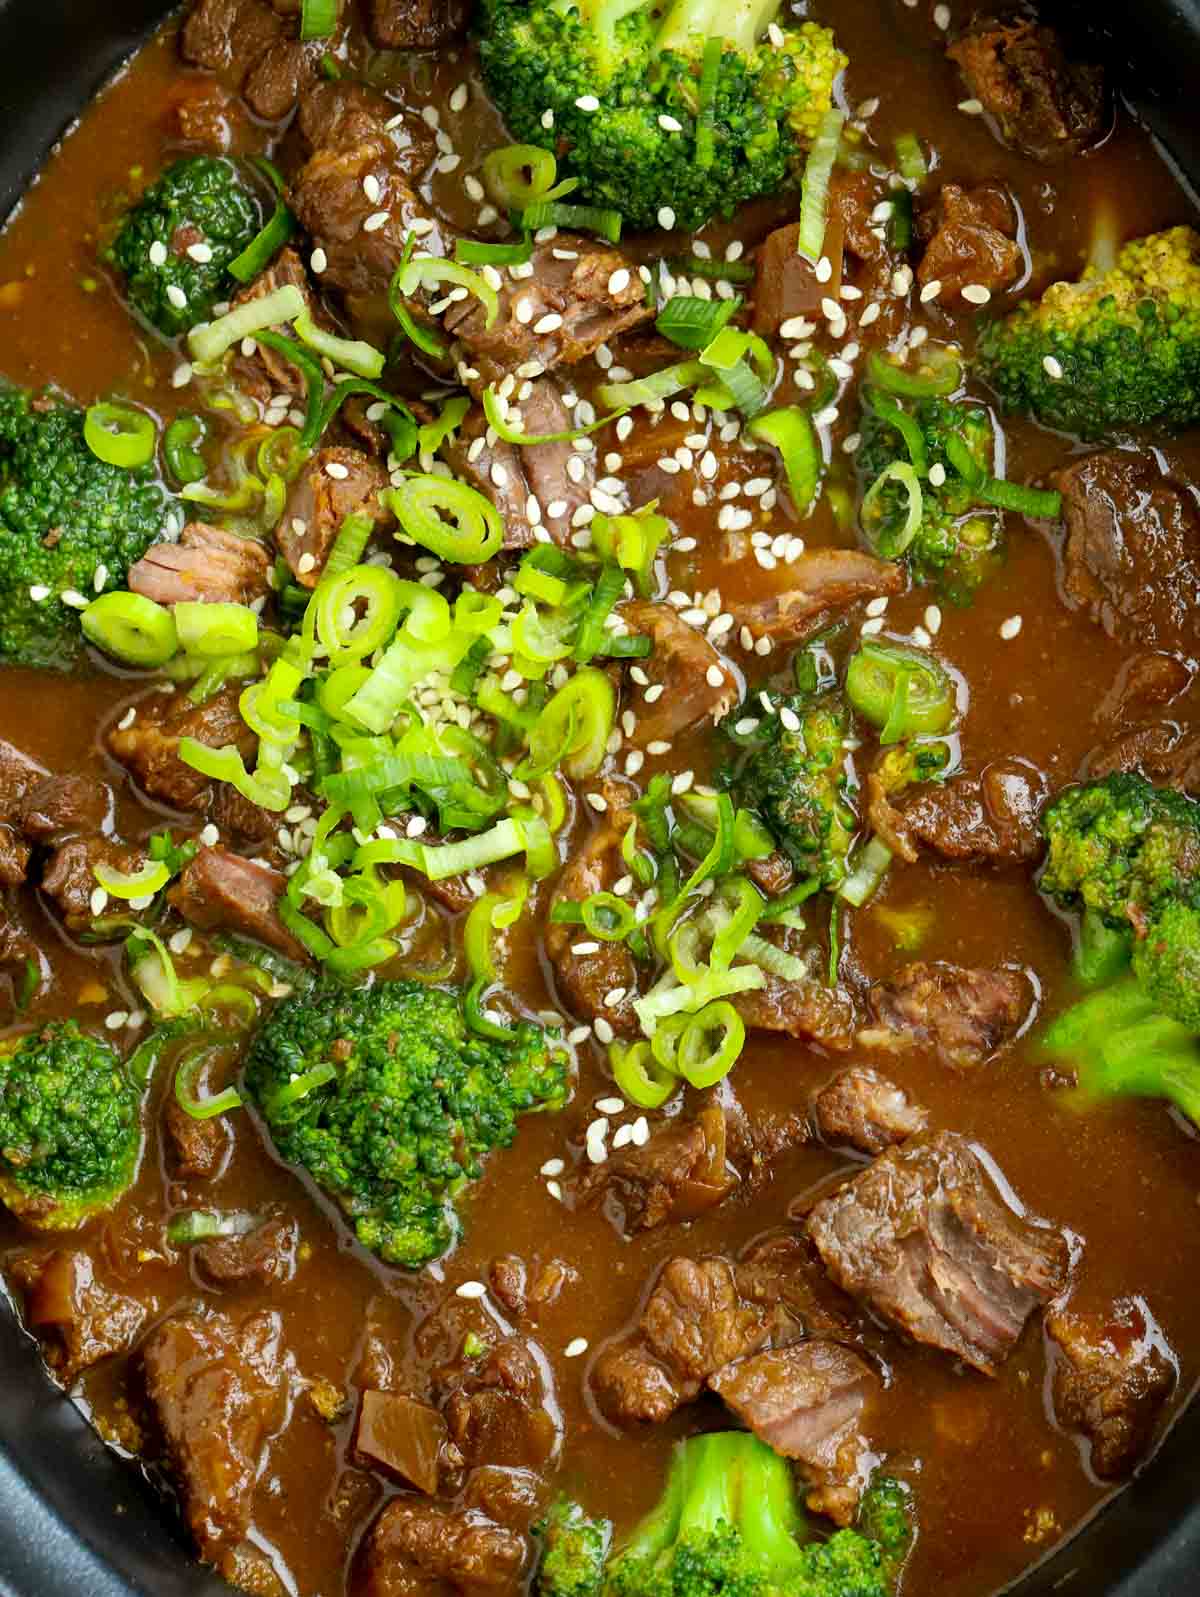 Close up of the dish Beef and Broccoli made in a slow cooker.